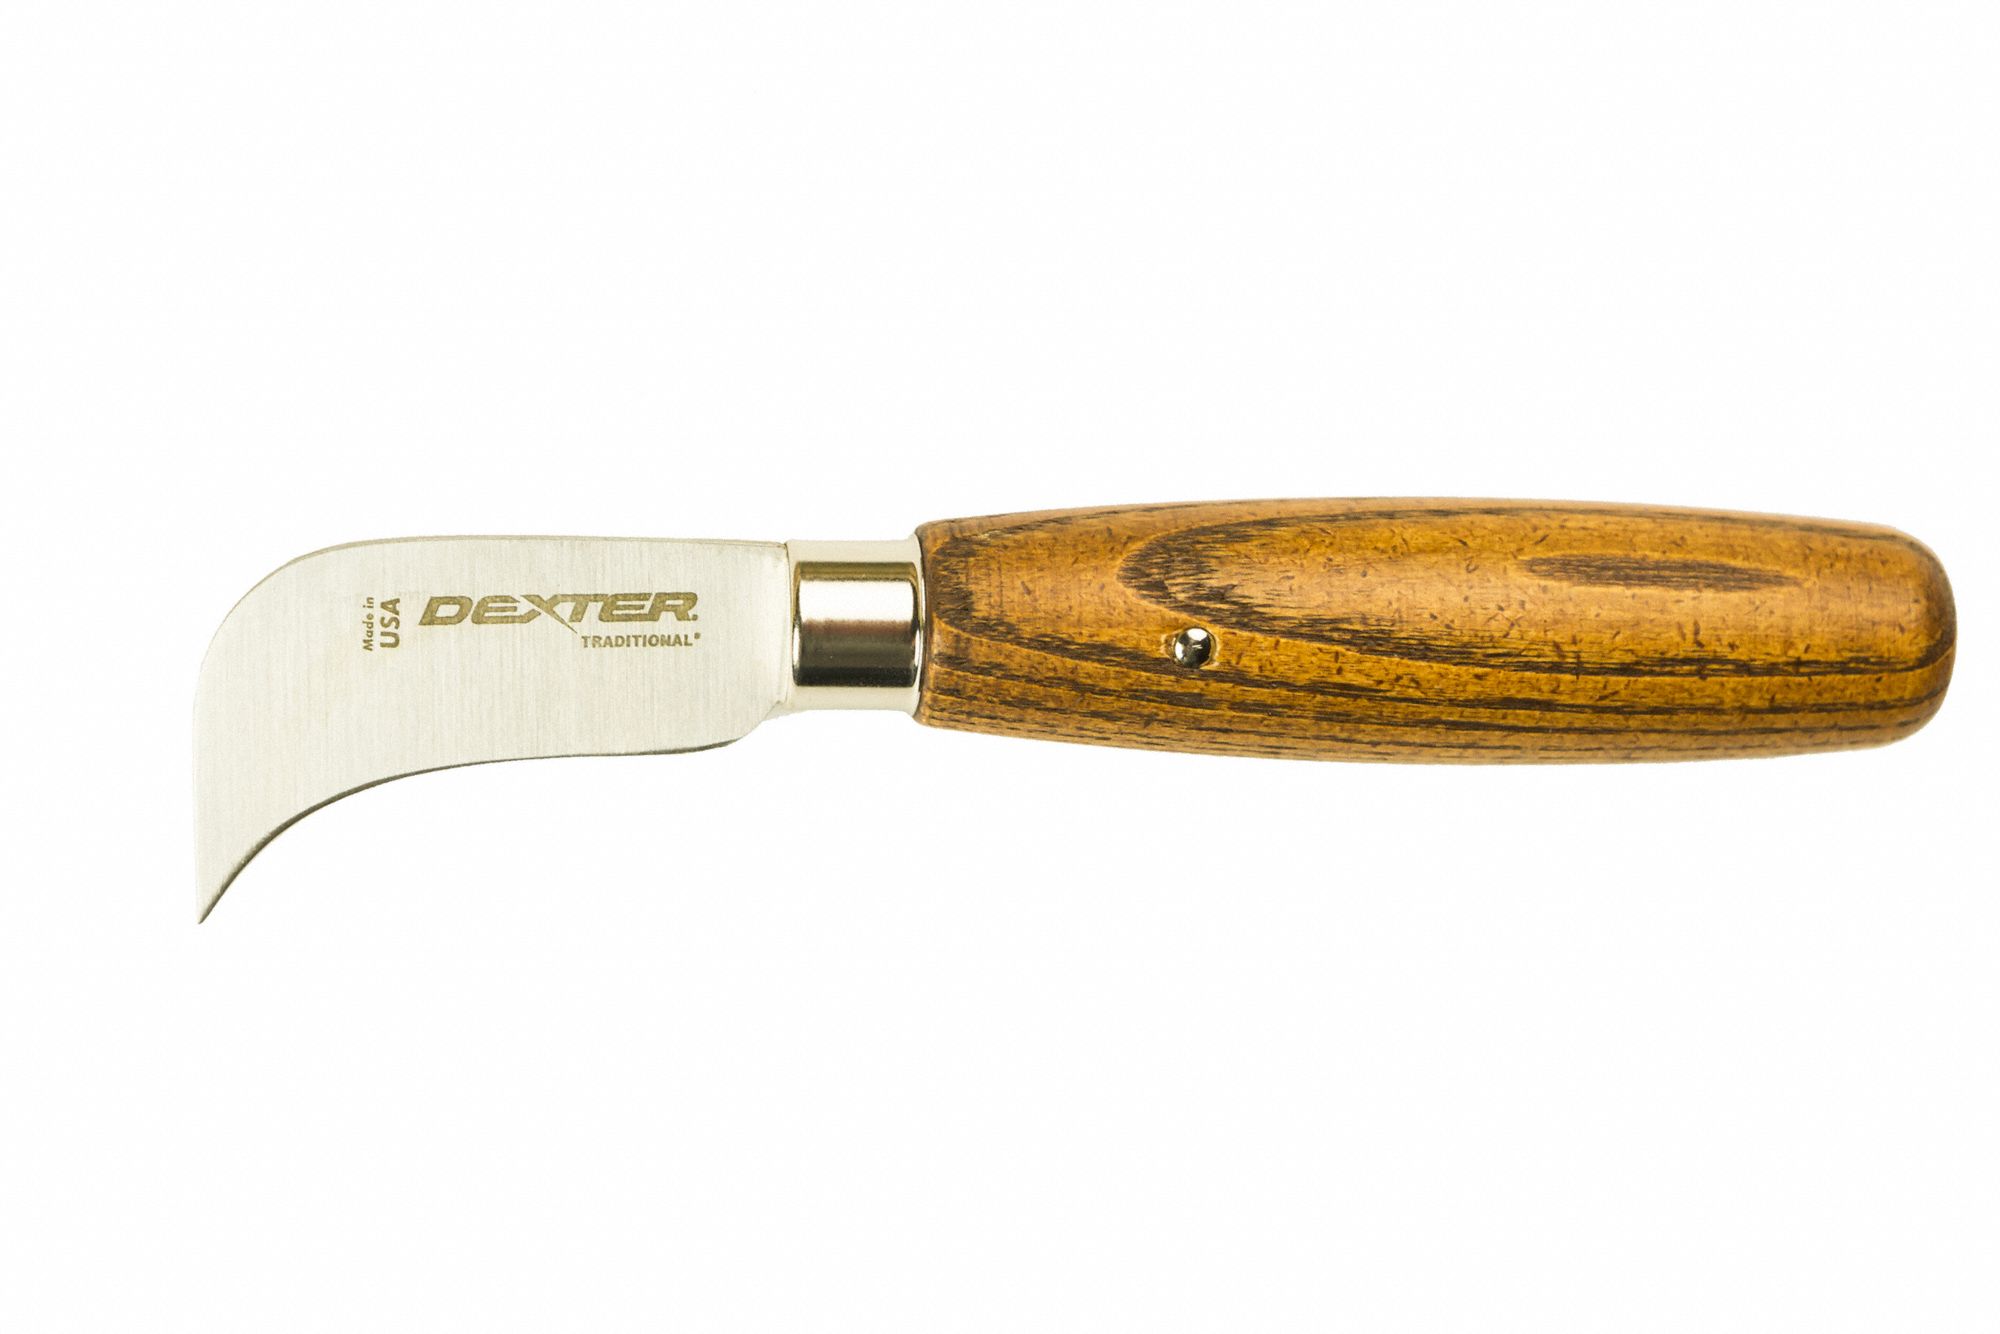 Dexter Russell S5289 Traditional™ (08240)